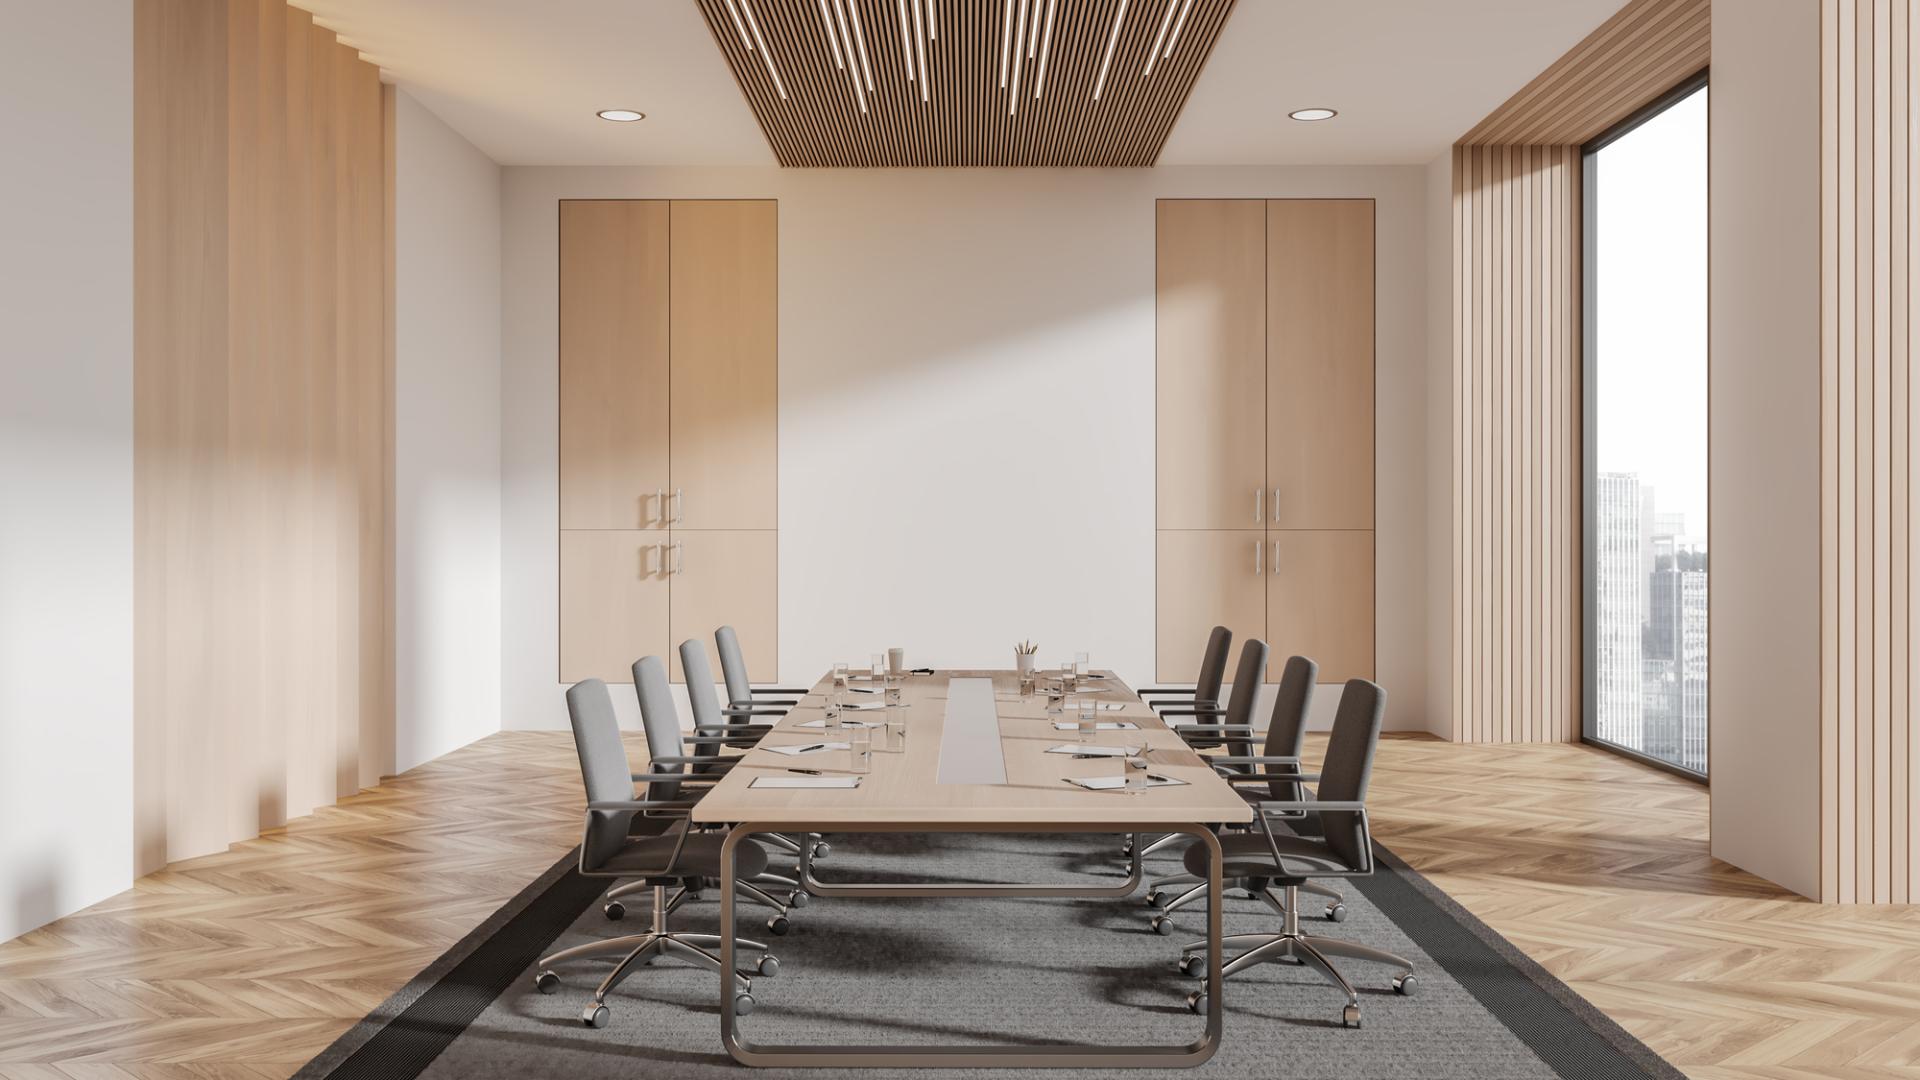 Hotel Meeting Rooms for Hire in London